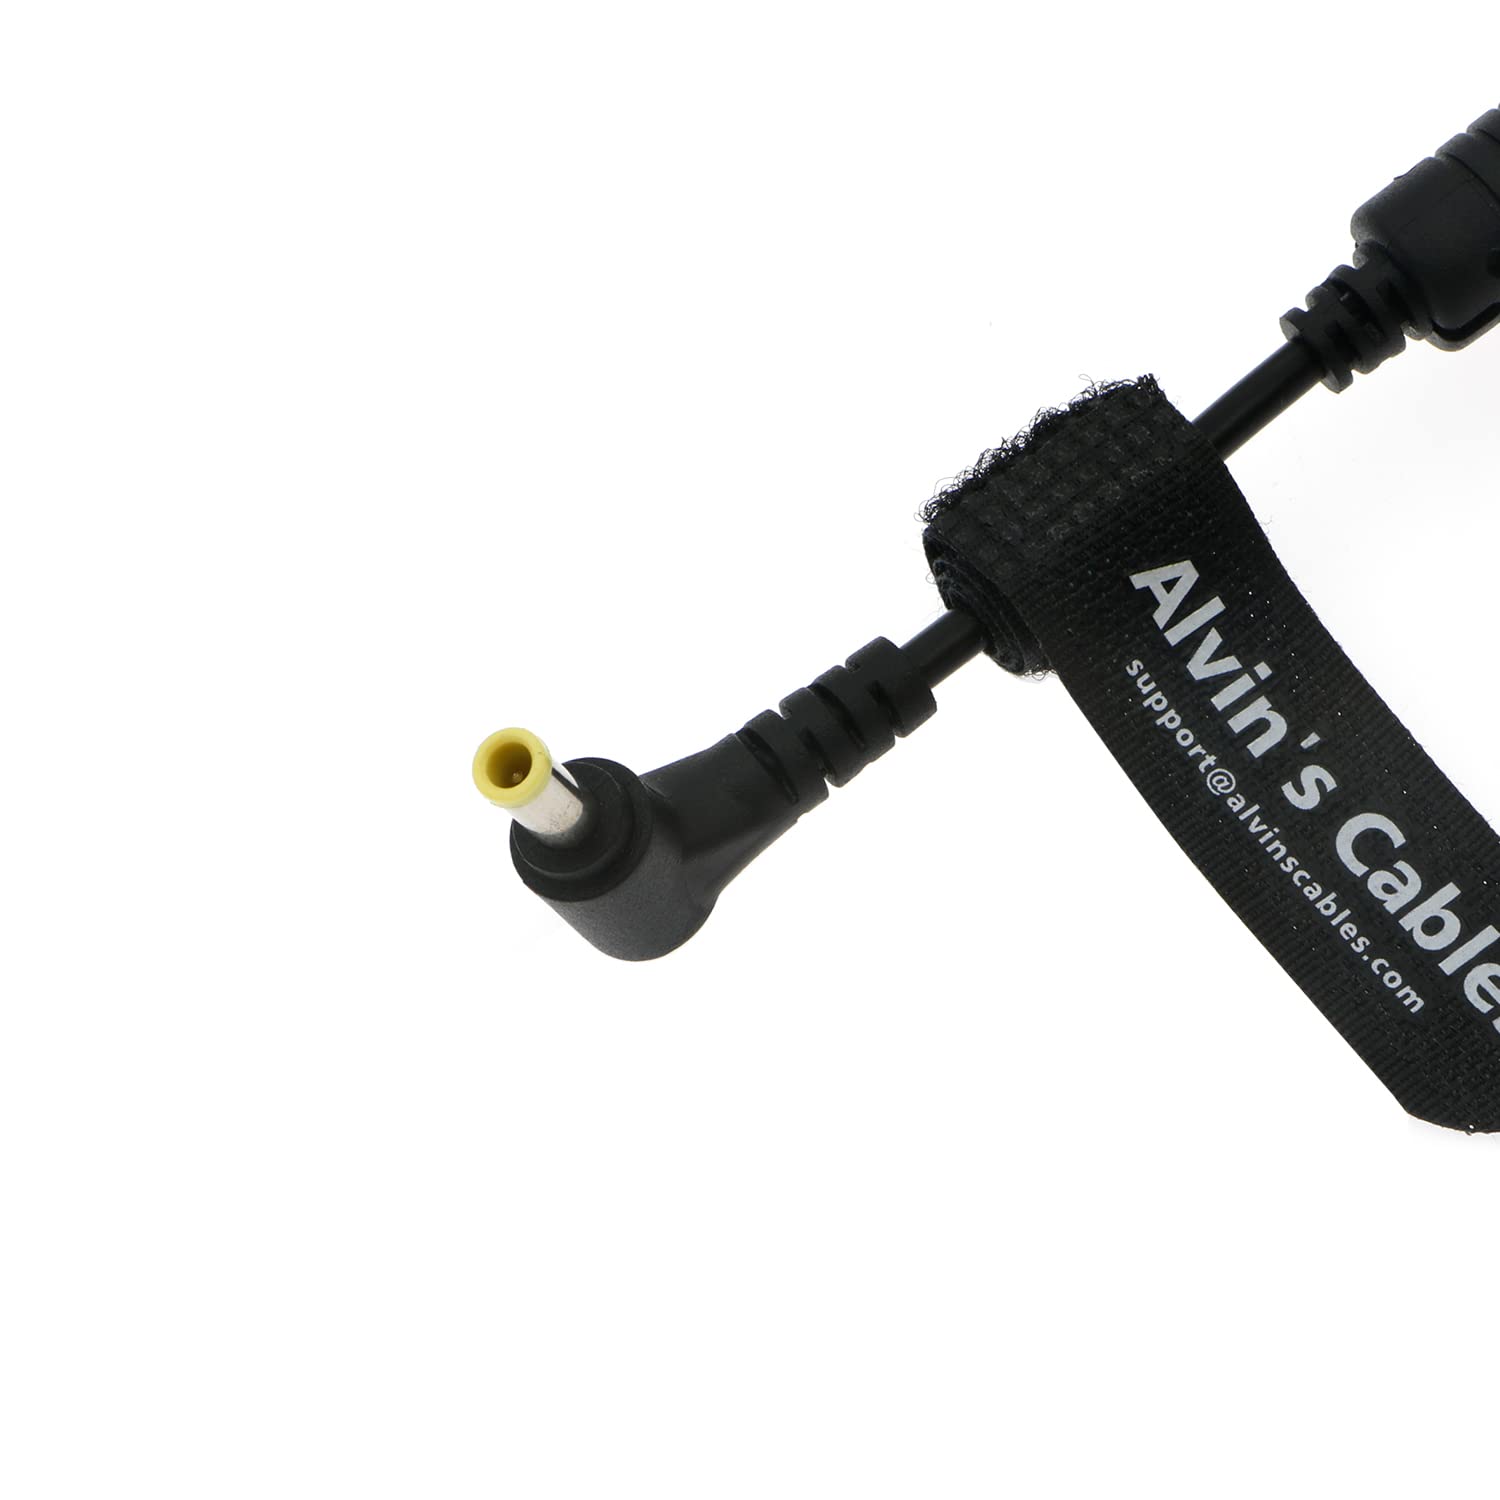 Power Cable for Sony FS7 M2 Right Angle DC to 3 Pin Male 12V Cable for Steadicam Archer 2 26CM Alvin's Cables